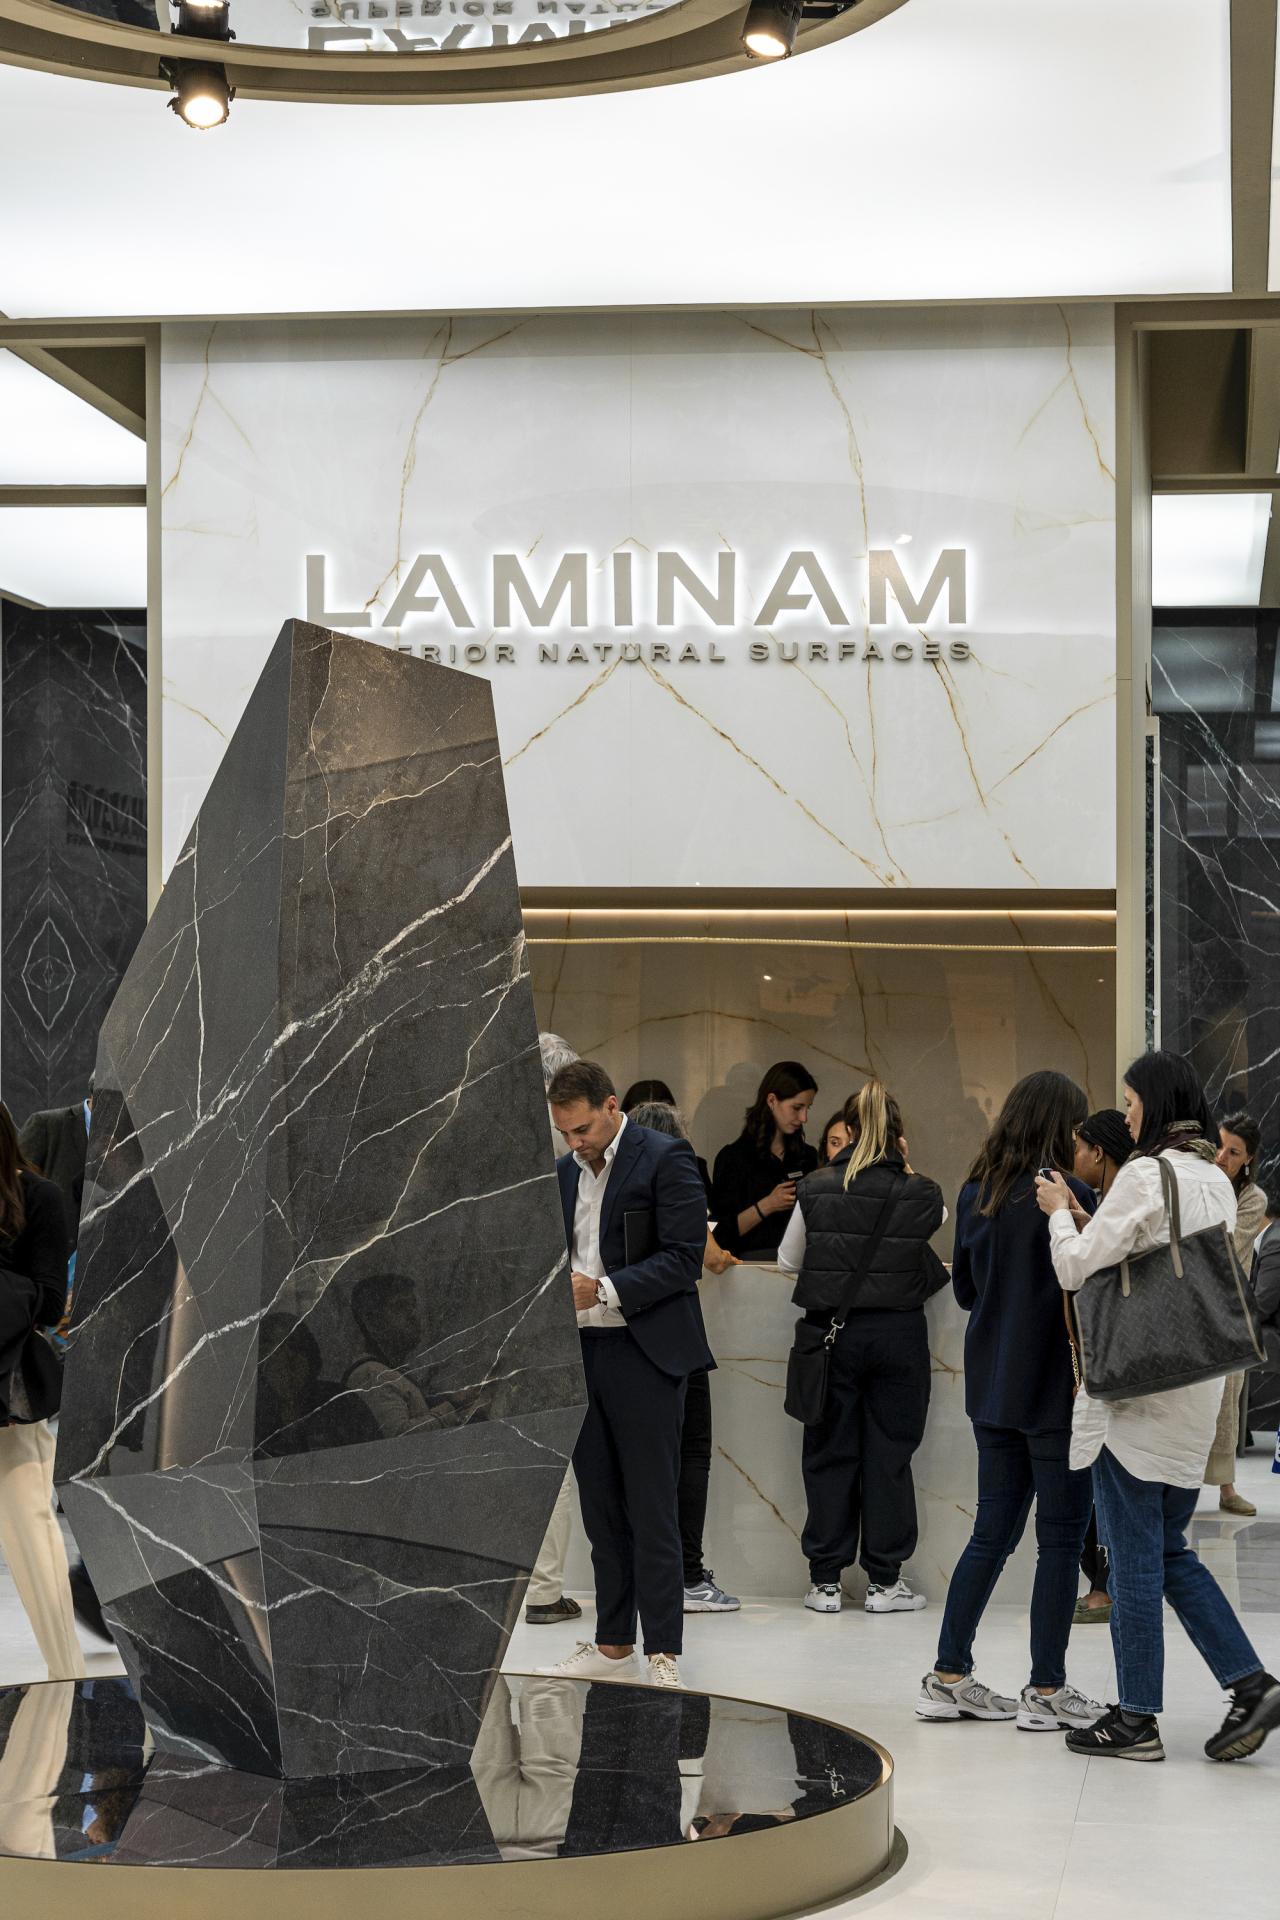 Laminam: Revolutionizing the Ceramic Slab Industry with Innovation, Sustainability, and Artistry - An Interview with Sales Director Matteo Messori